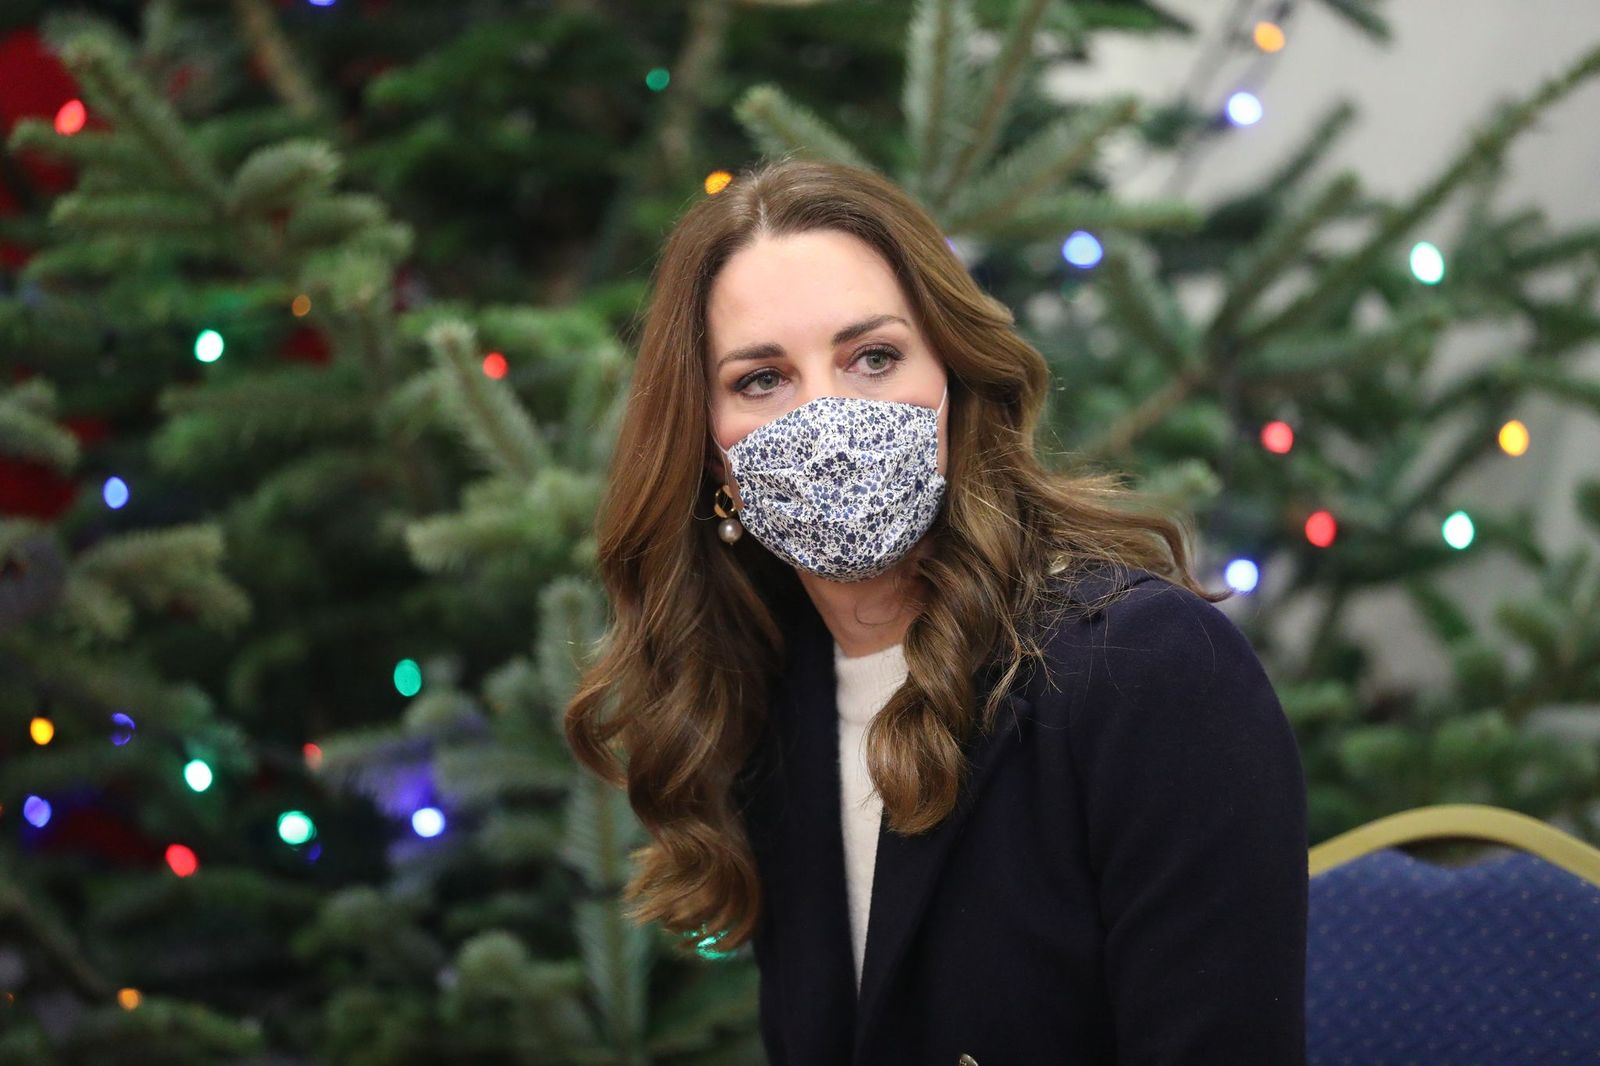 Catherine, The Duchess of Cambridge at Batley Community Centre, West Yorkshire meeting volunteers who have supported elderly members of the community throughout the coronavirus outbreak, on the second day of a three-day tour across the country, on December 7, 2020 | Photo: Getty Images